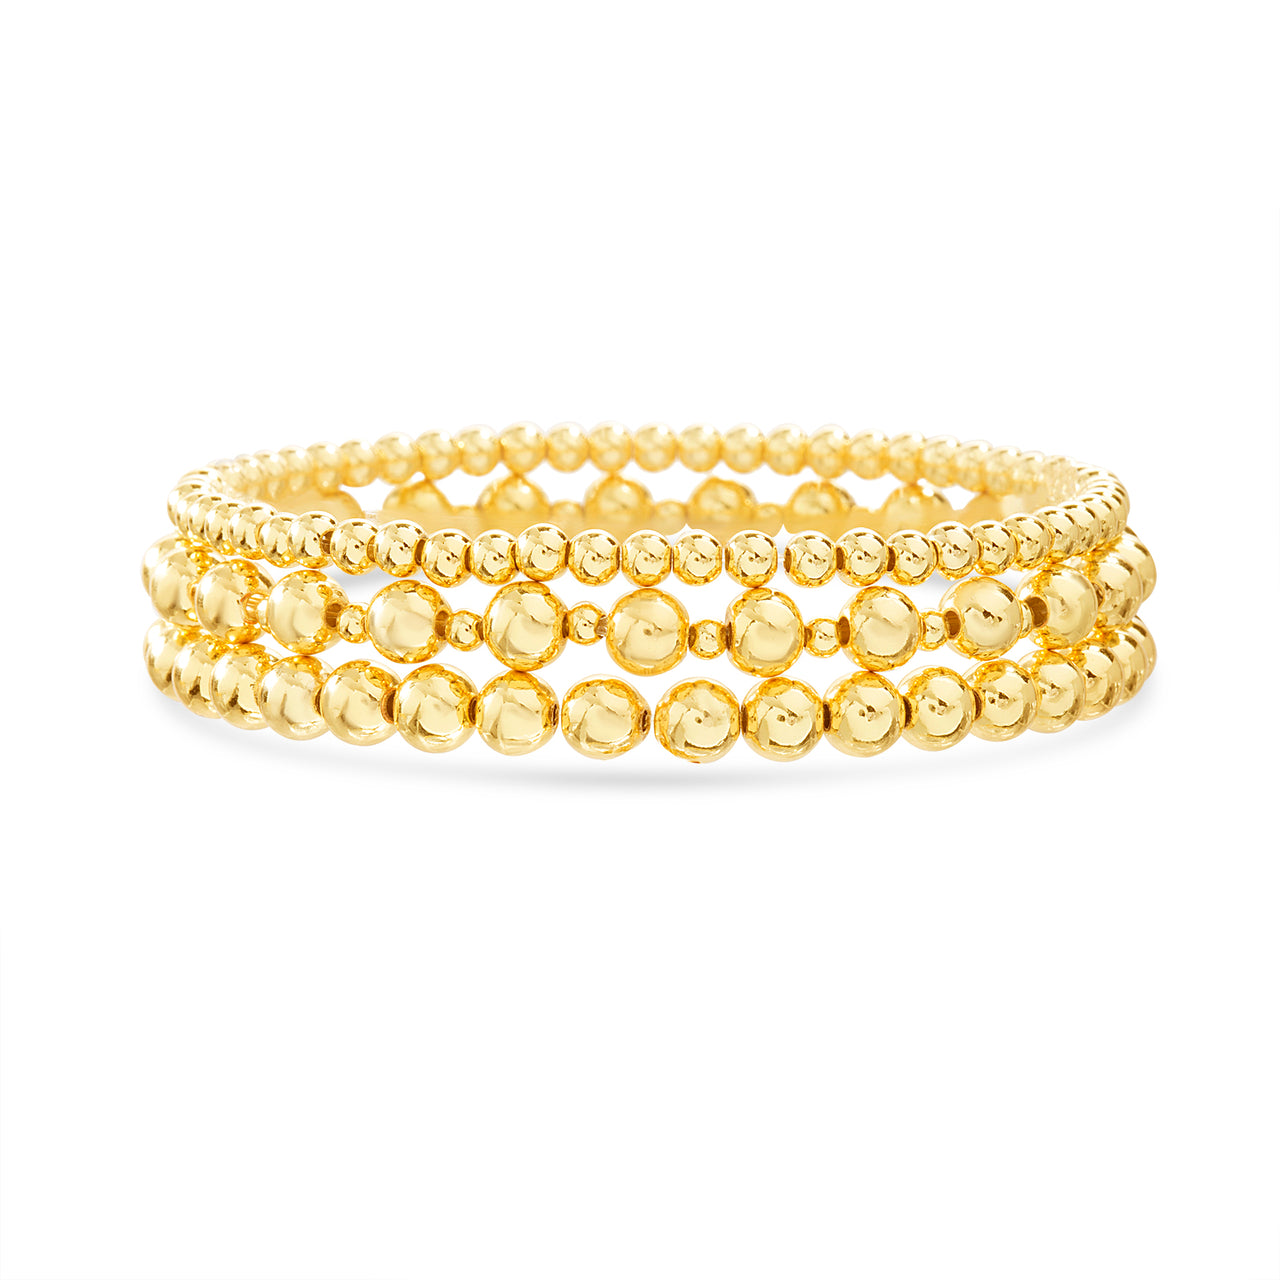 Lesa Michele Round Beaded Trio Bracelet Set in Yellow Gold Plated Brass